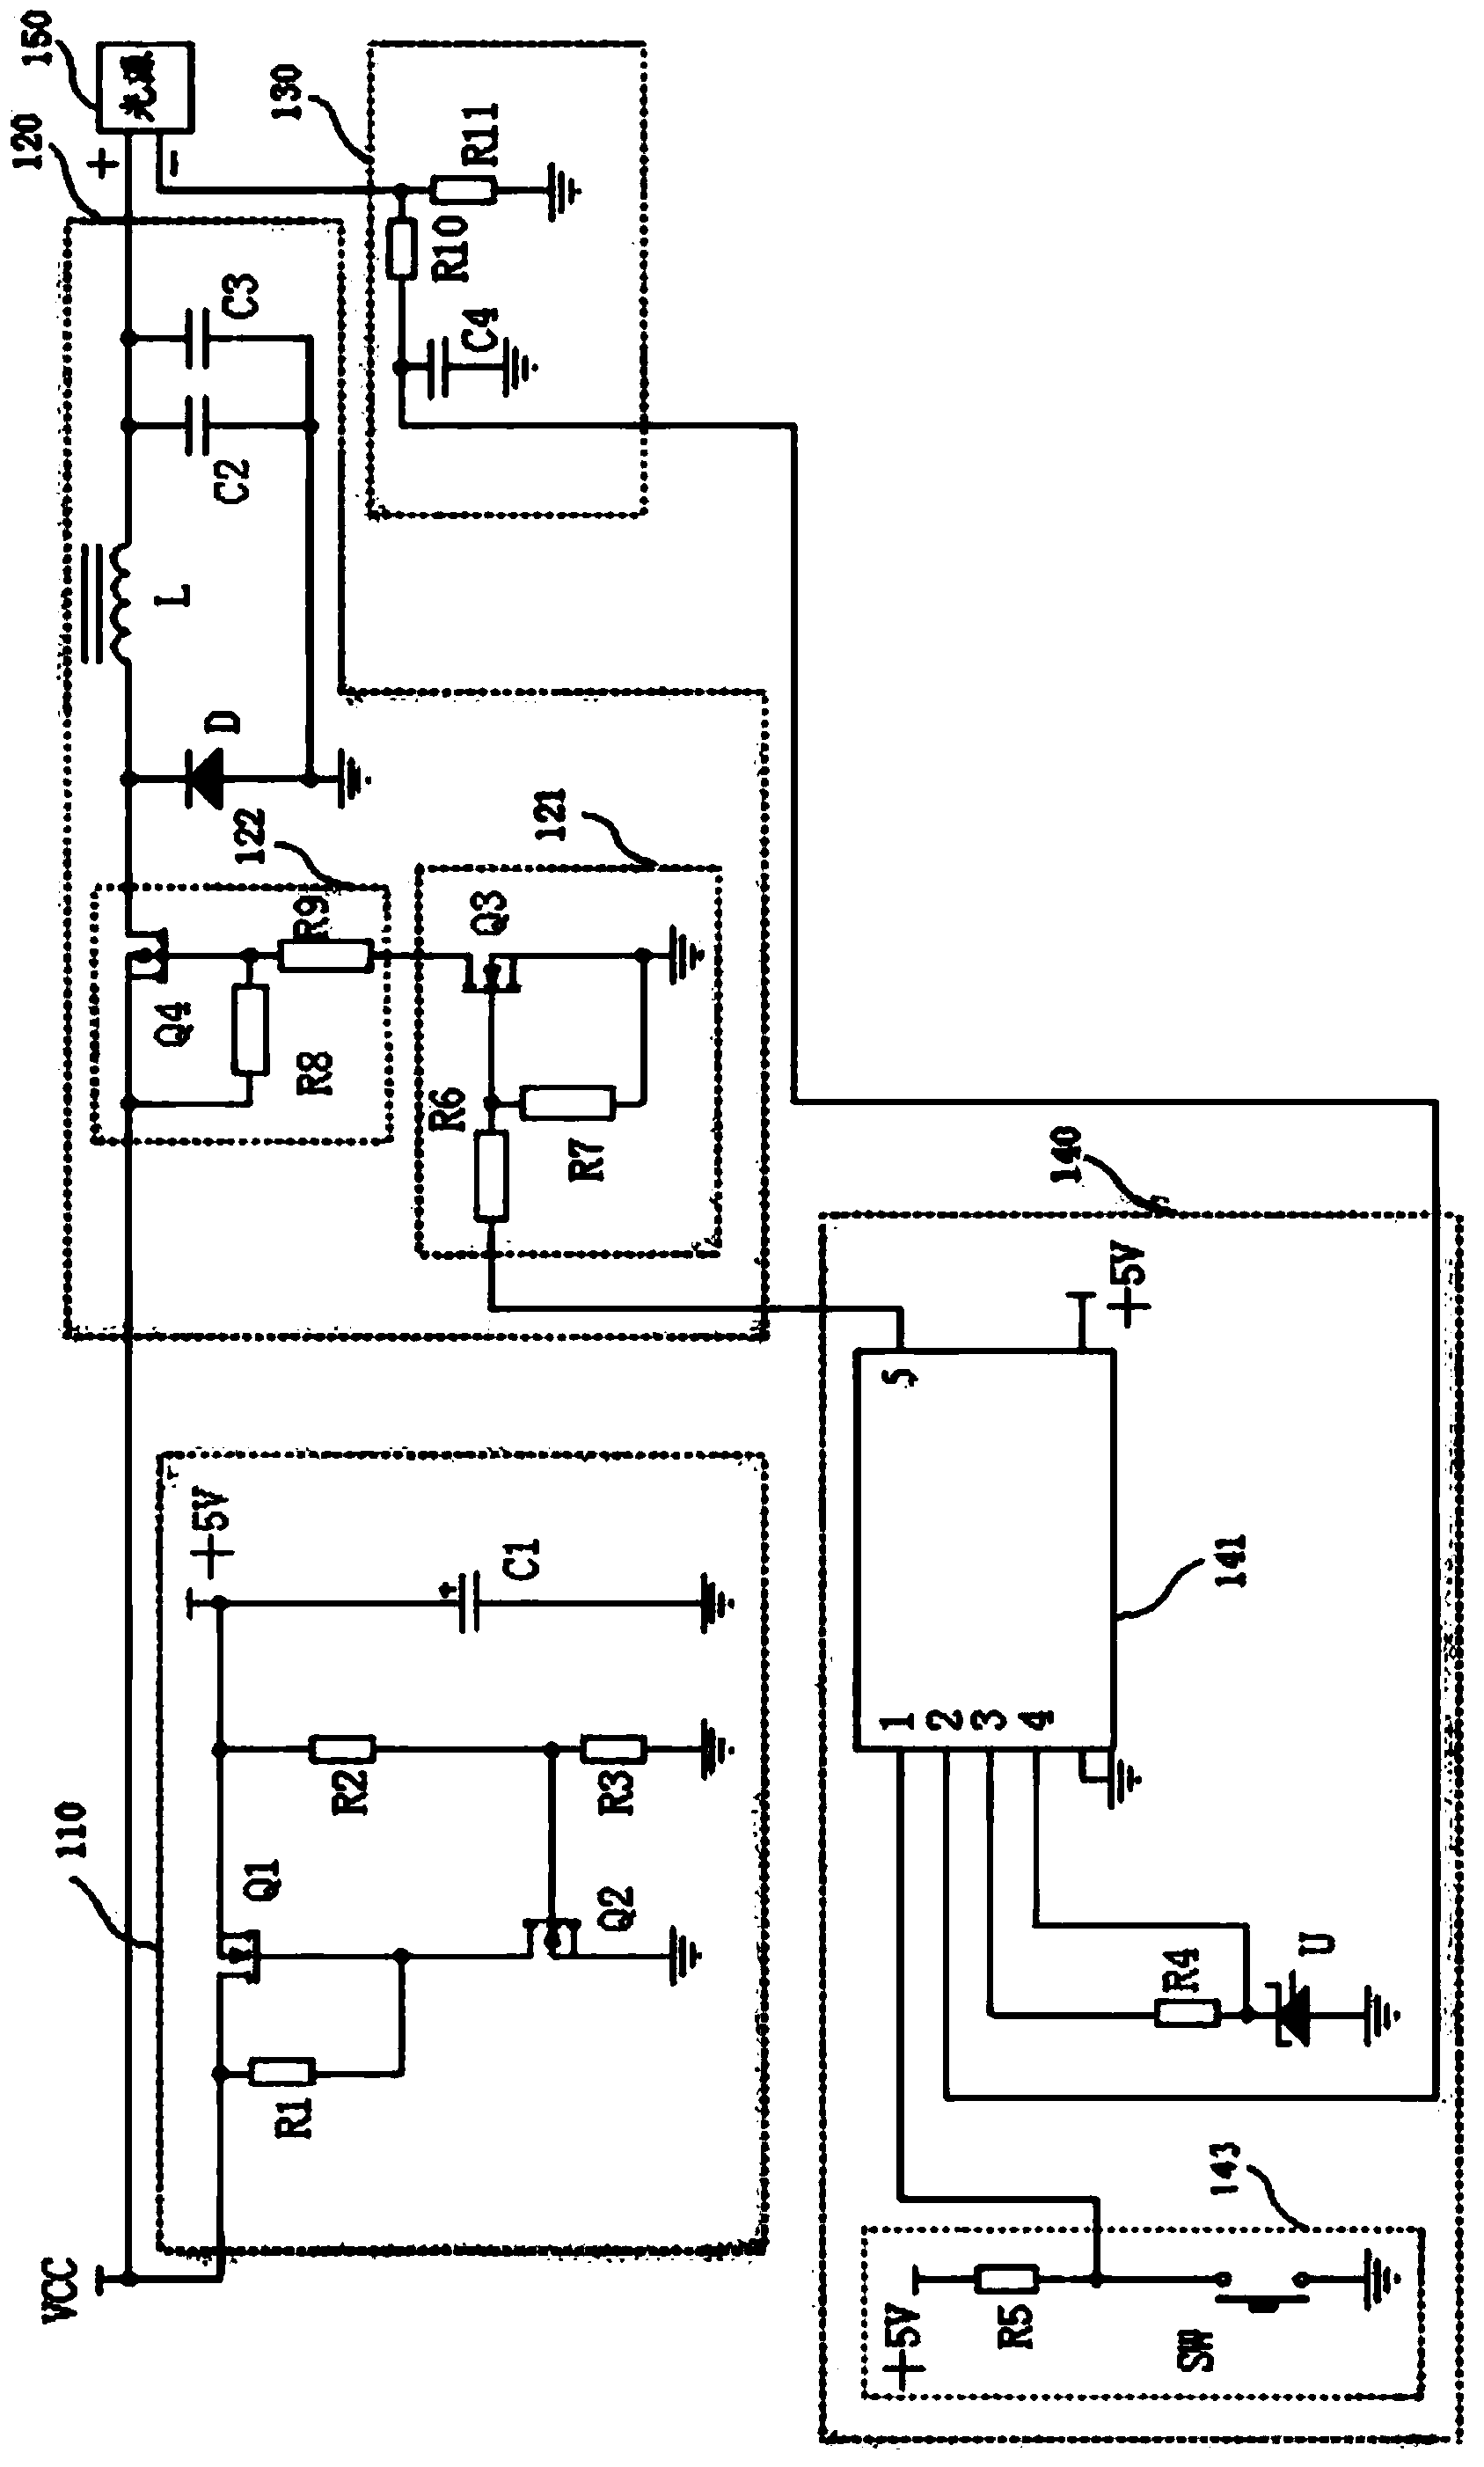 Drive circuit and lamp fixture